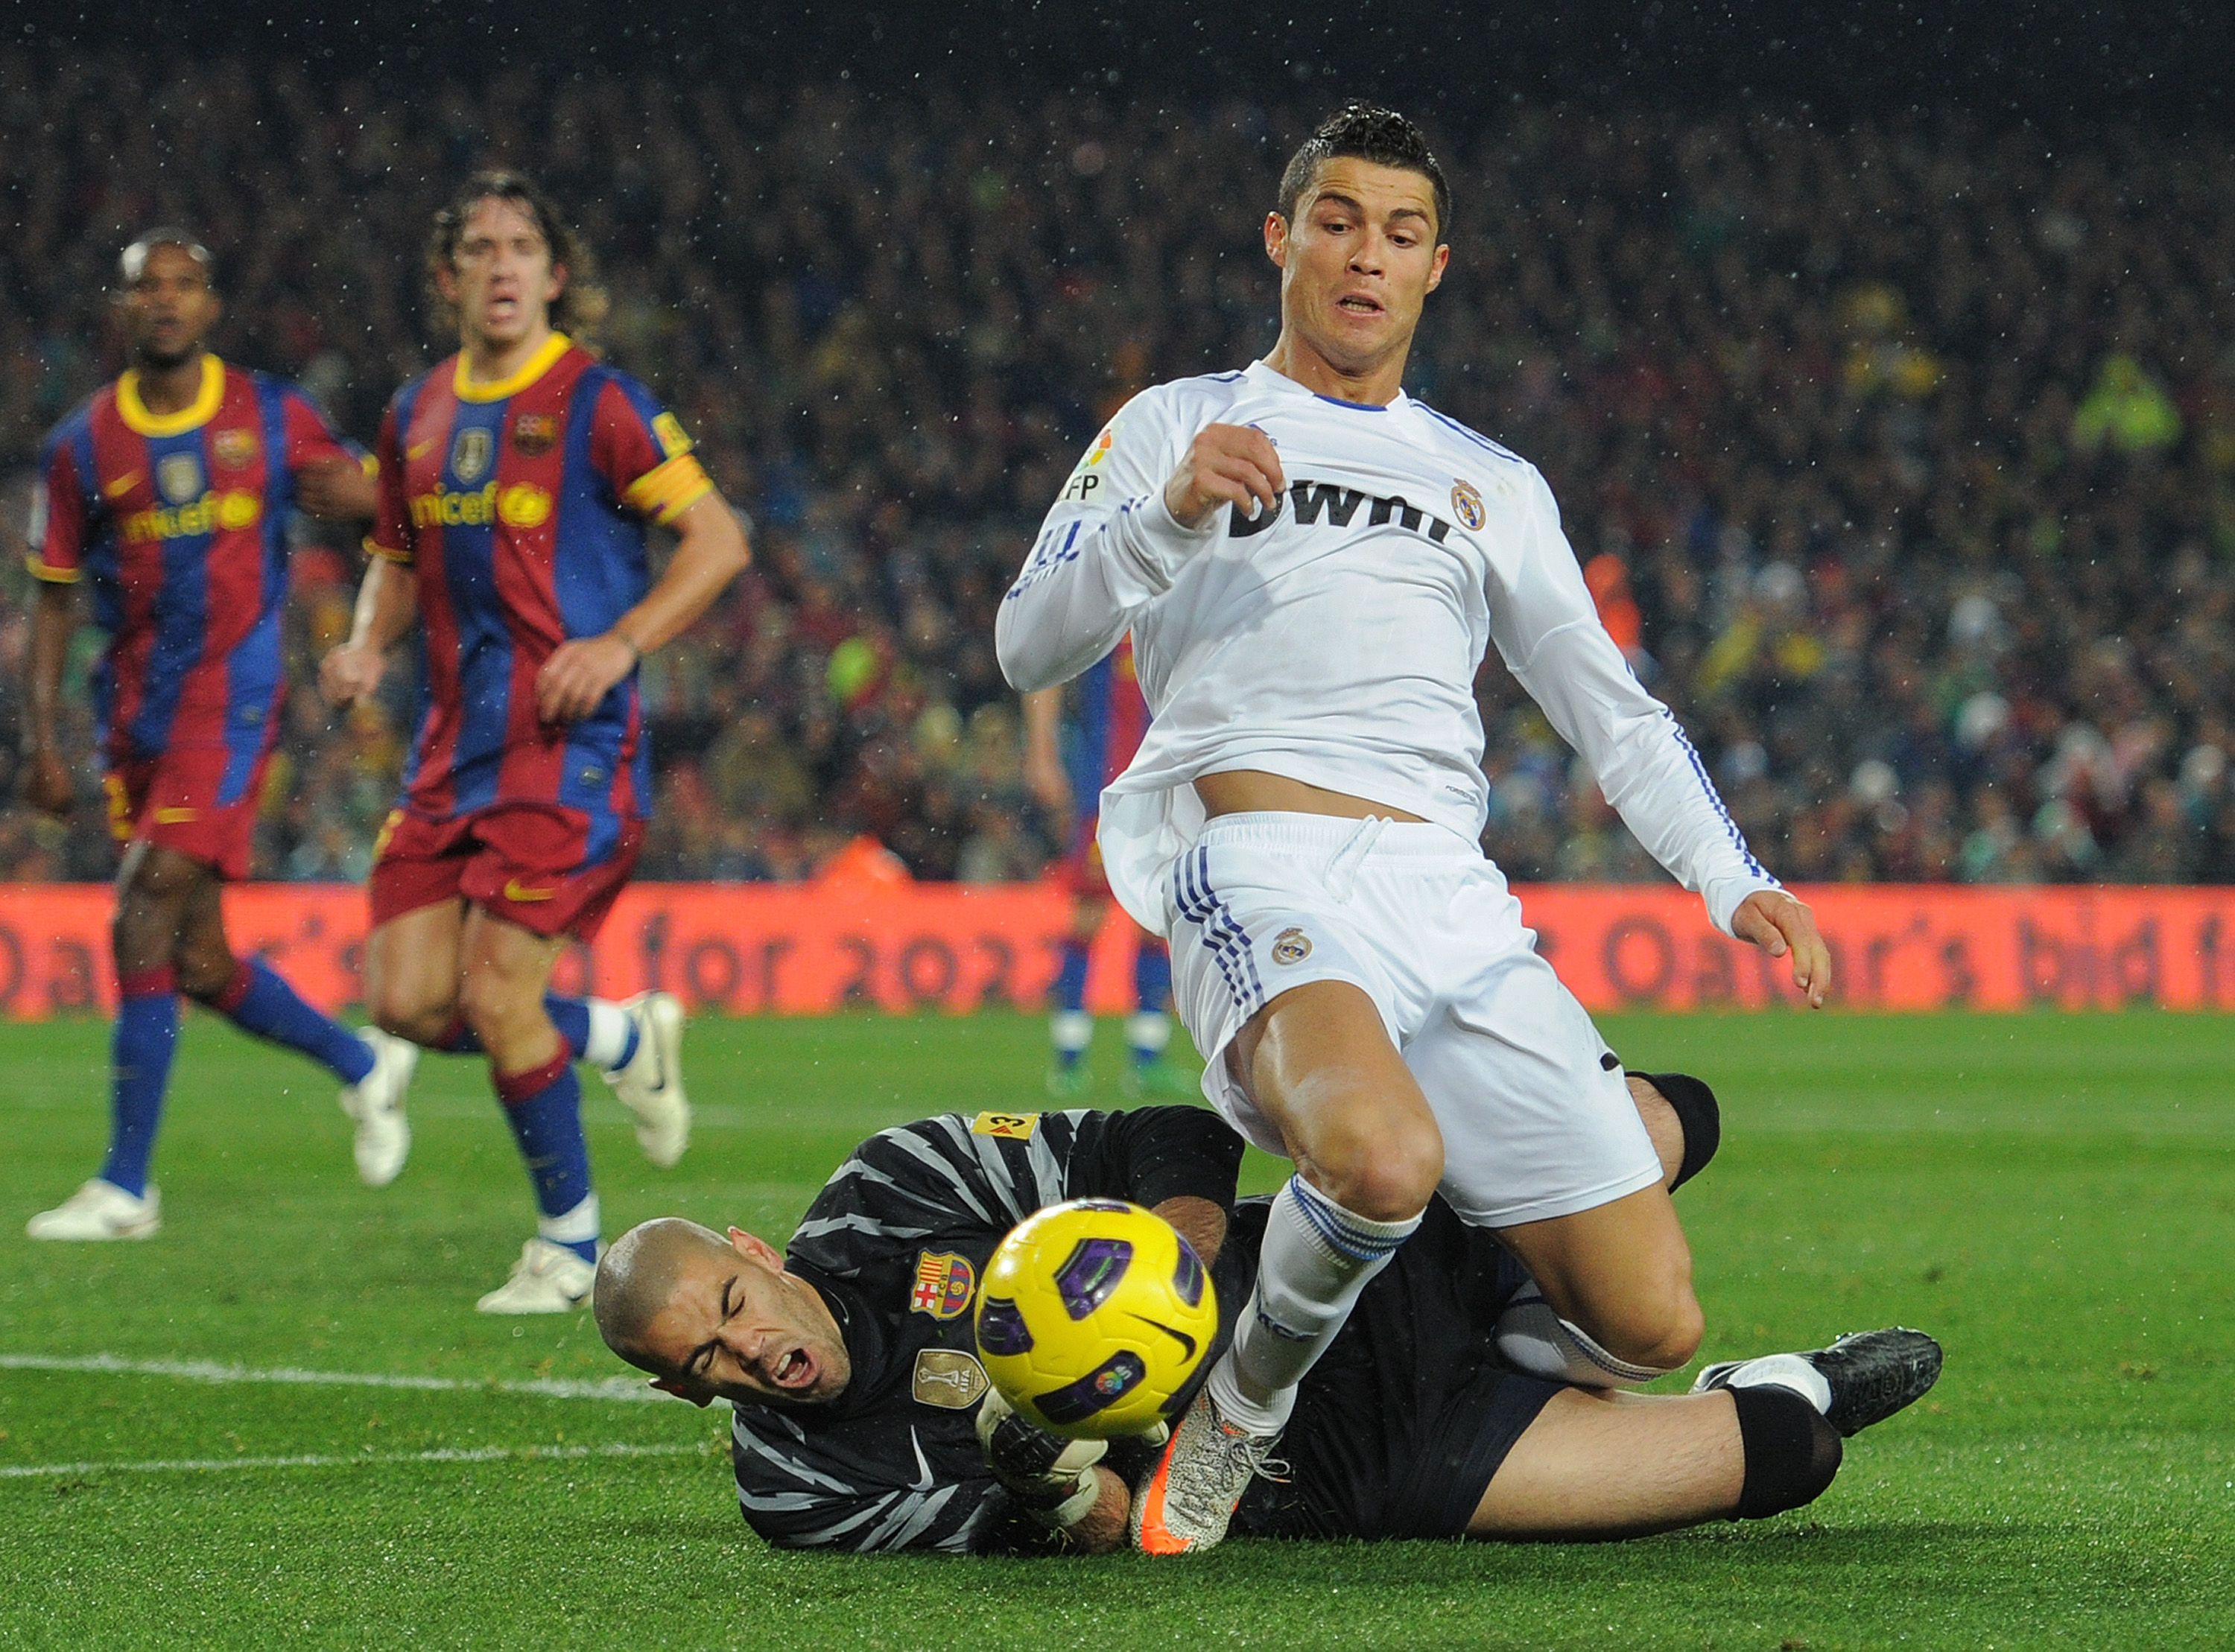 BARCELONA, SPAIN - NOVEMBER 29:  Cristiano Ronaldo (R) of Real Madrid is fouled in the penalty aeria by goalkeeper Victor Valdes of Barcelona during the la liga match between Barcelona and Real Madrid at the Camp Nou stadium on November 29, 2010 in Barcel